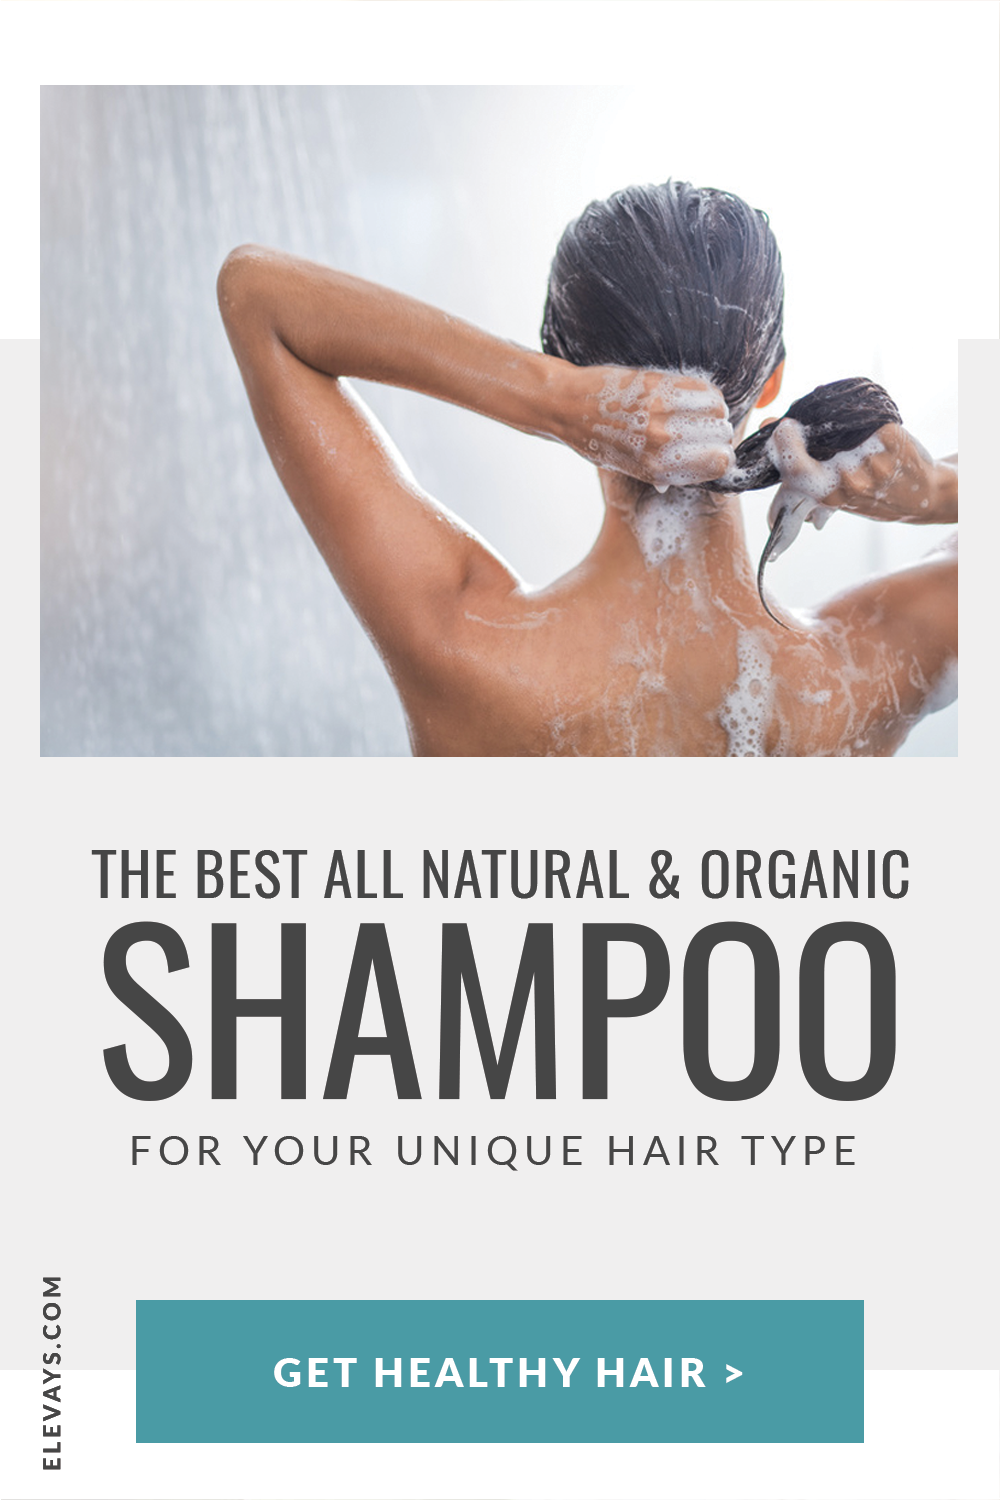 The Best All Natural & Organic Shampoo for Your Hair Type